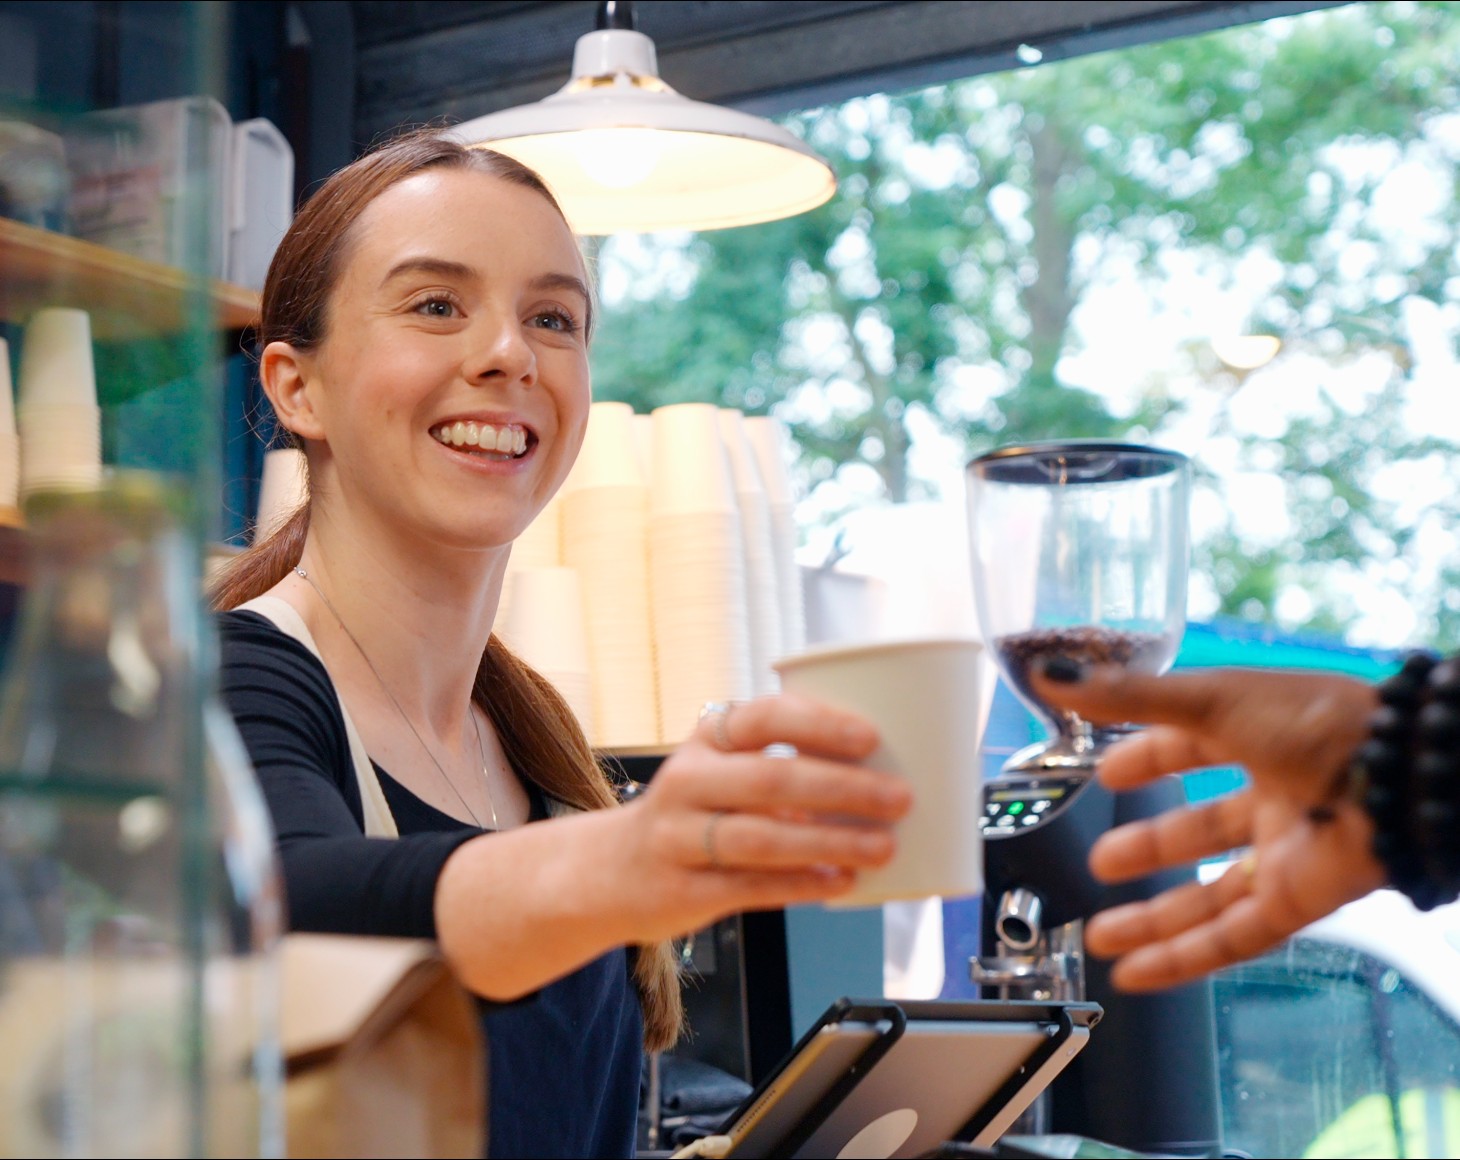 A woman serving coffee to customer